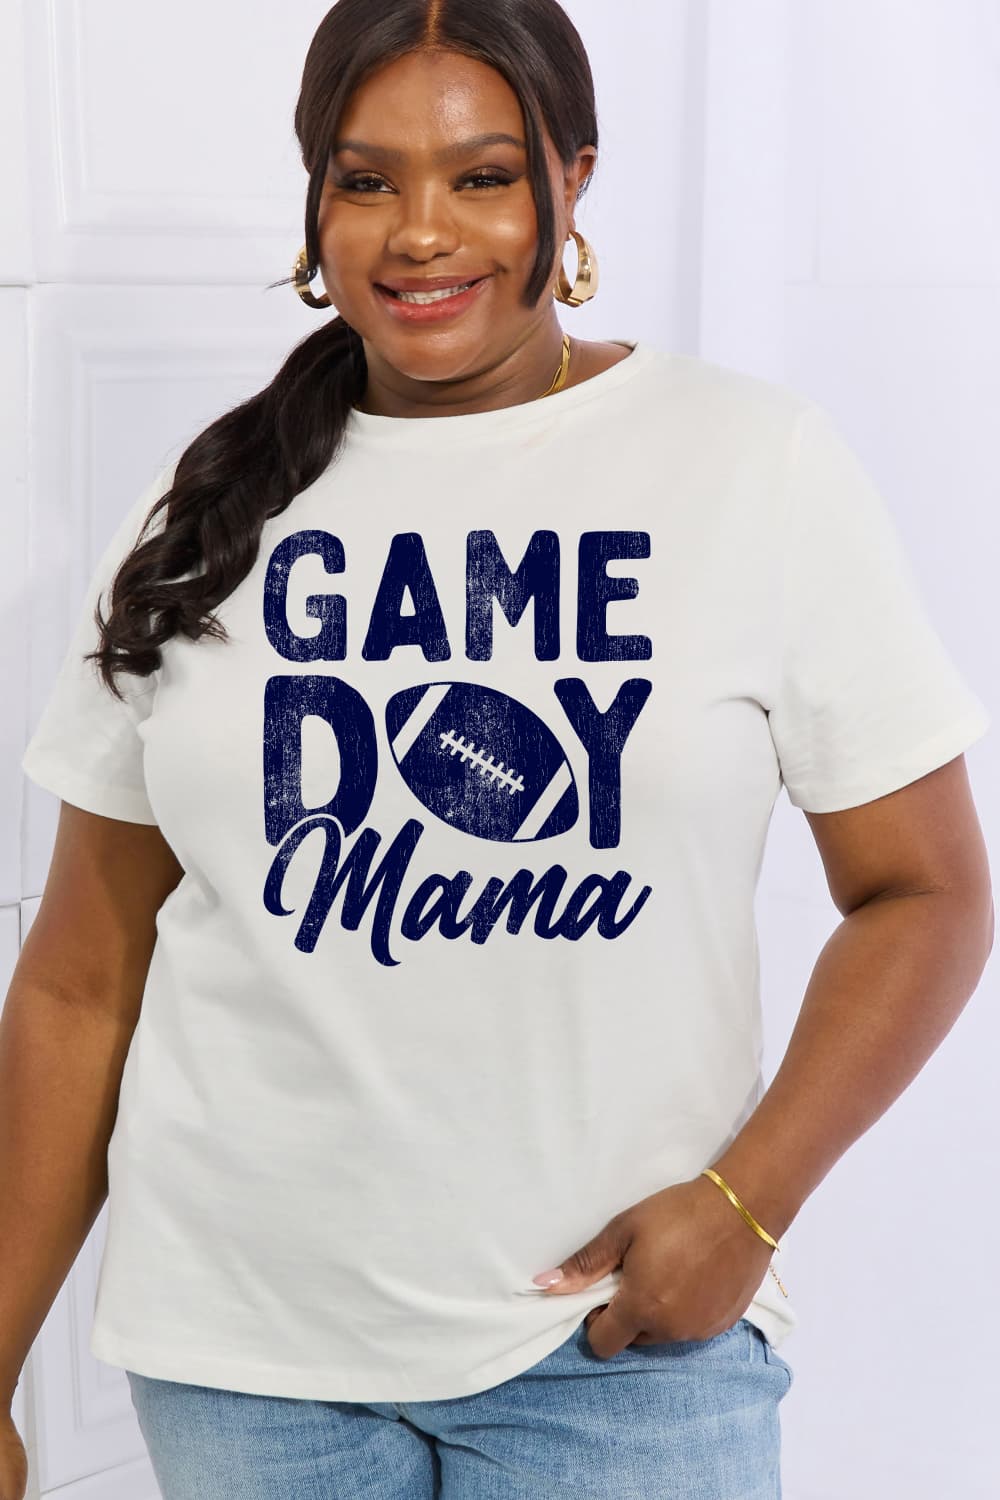 Simply Love Full Size GAMEDAY MAMA Graphic Cotton Tee (2 Colors)  Krazy Heart Designs Boutique Bleach S 